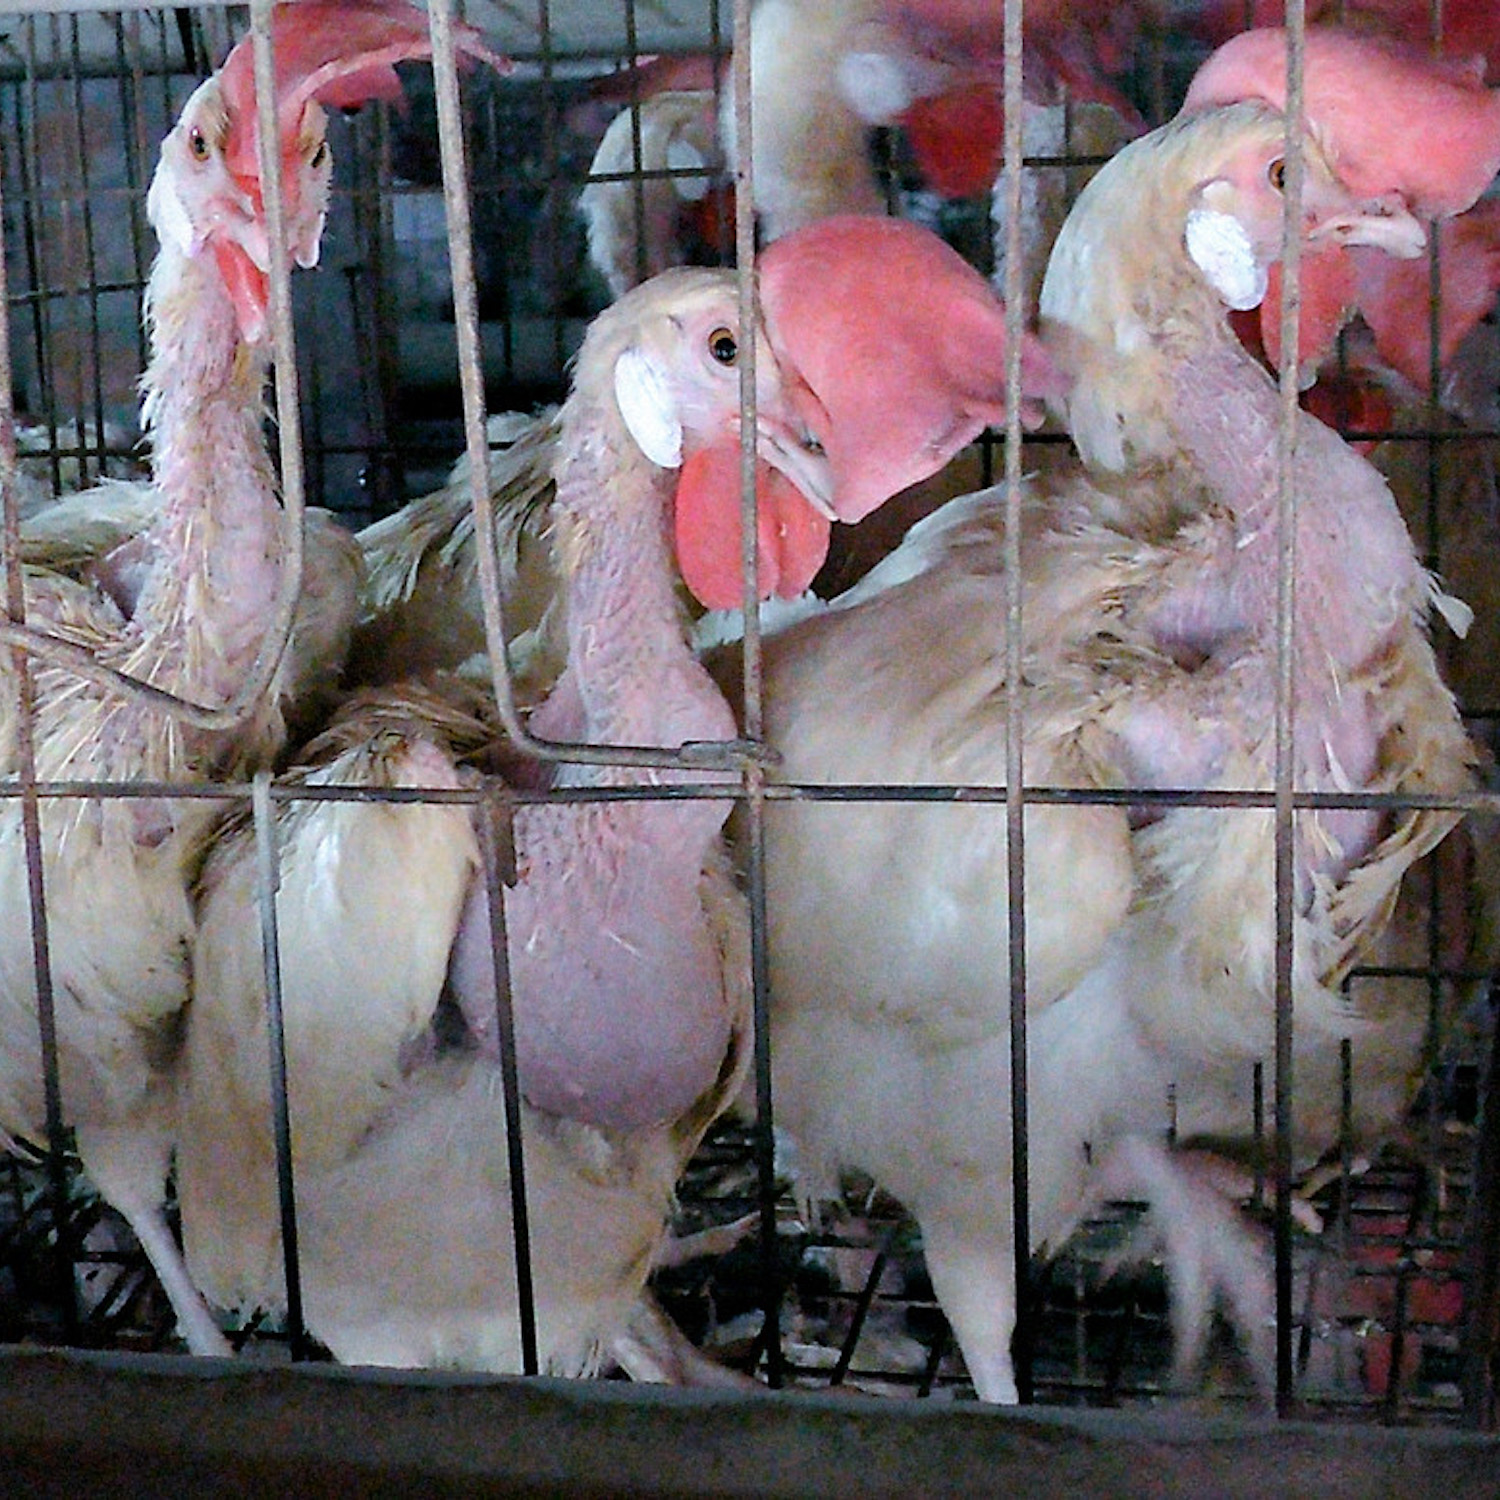 32170041334 60f45e95b8 h 1 The Open Wing Alliance Calls on Viking Cruises to Finally Announce a Ban on Cages for Hens